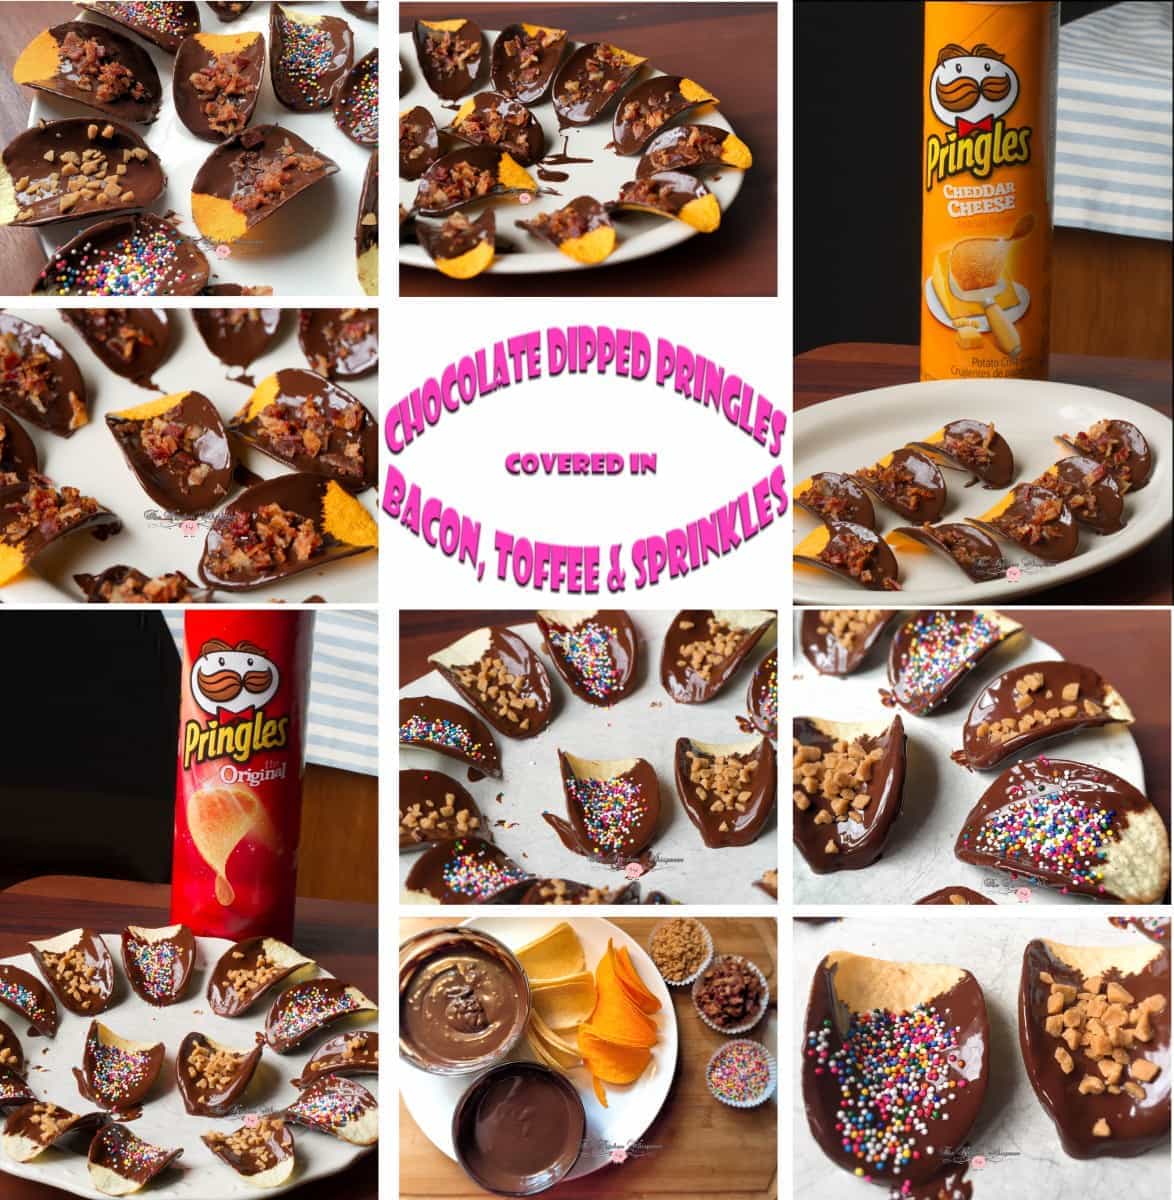 Bacon Toffee Chocolate Dipped Pringles collage